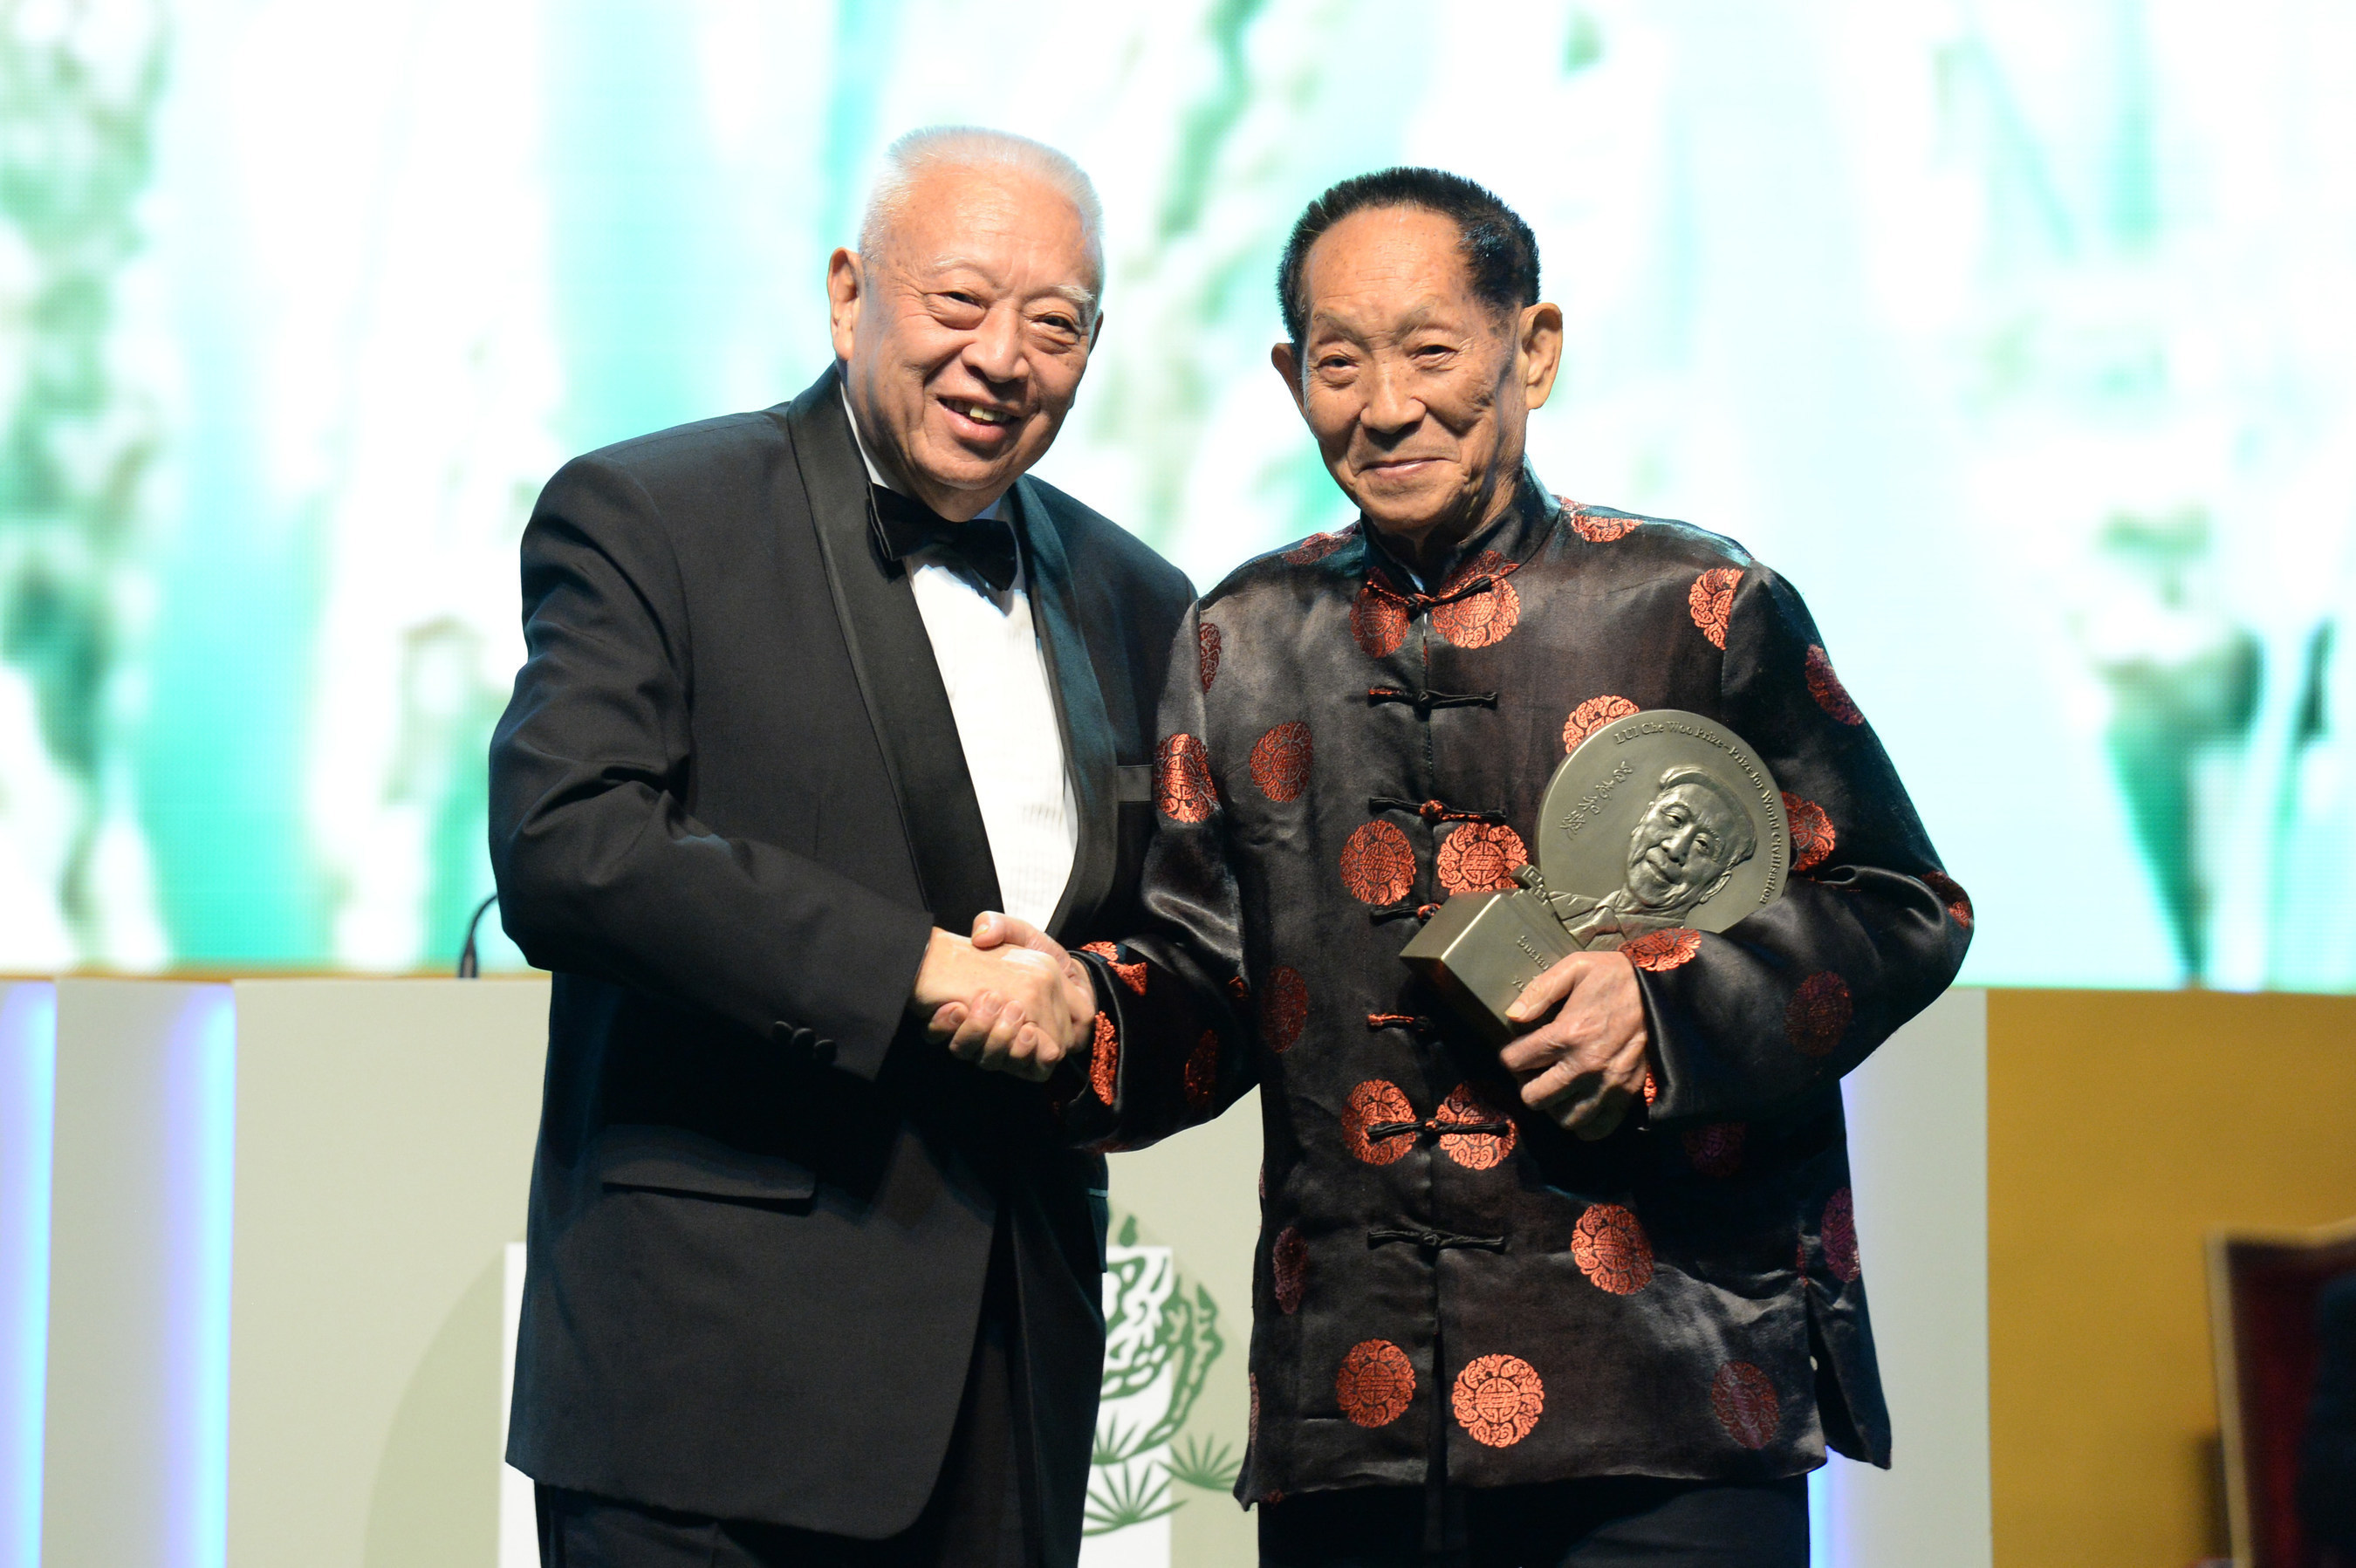 Prof. Yuan Longping, Sustainability Prize Laureate of LUI Che Woo Prize – Prize for World Civilisation 2016.